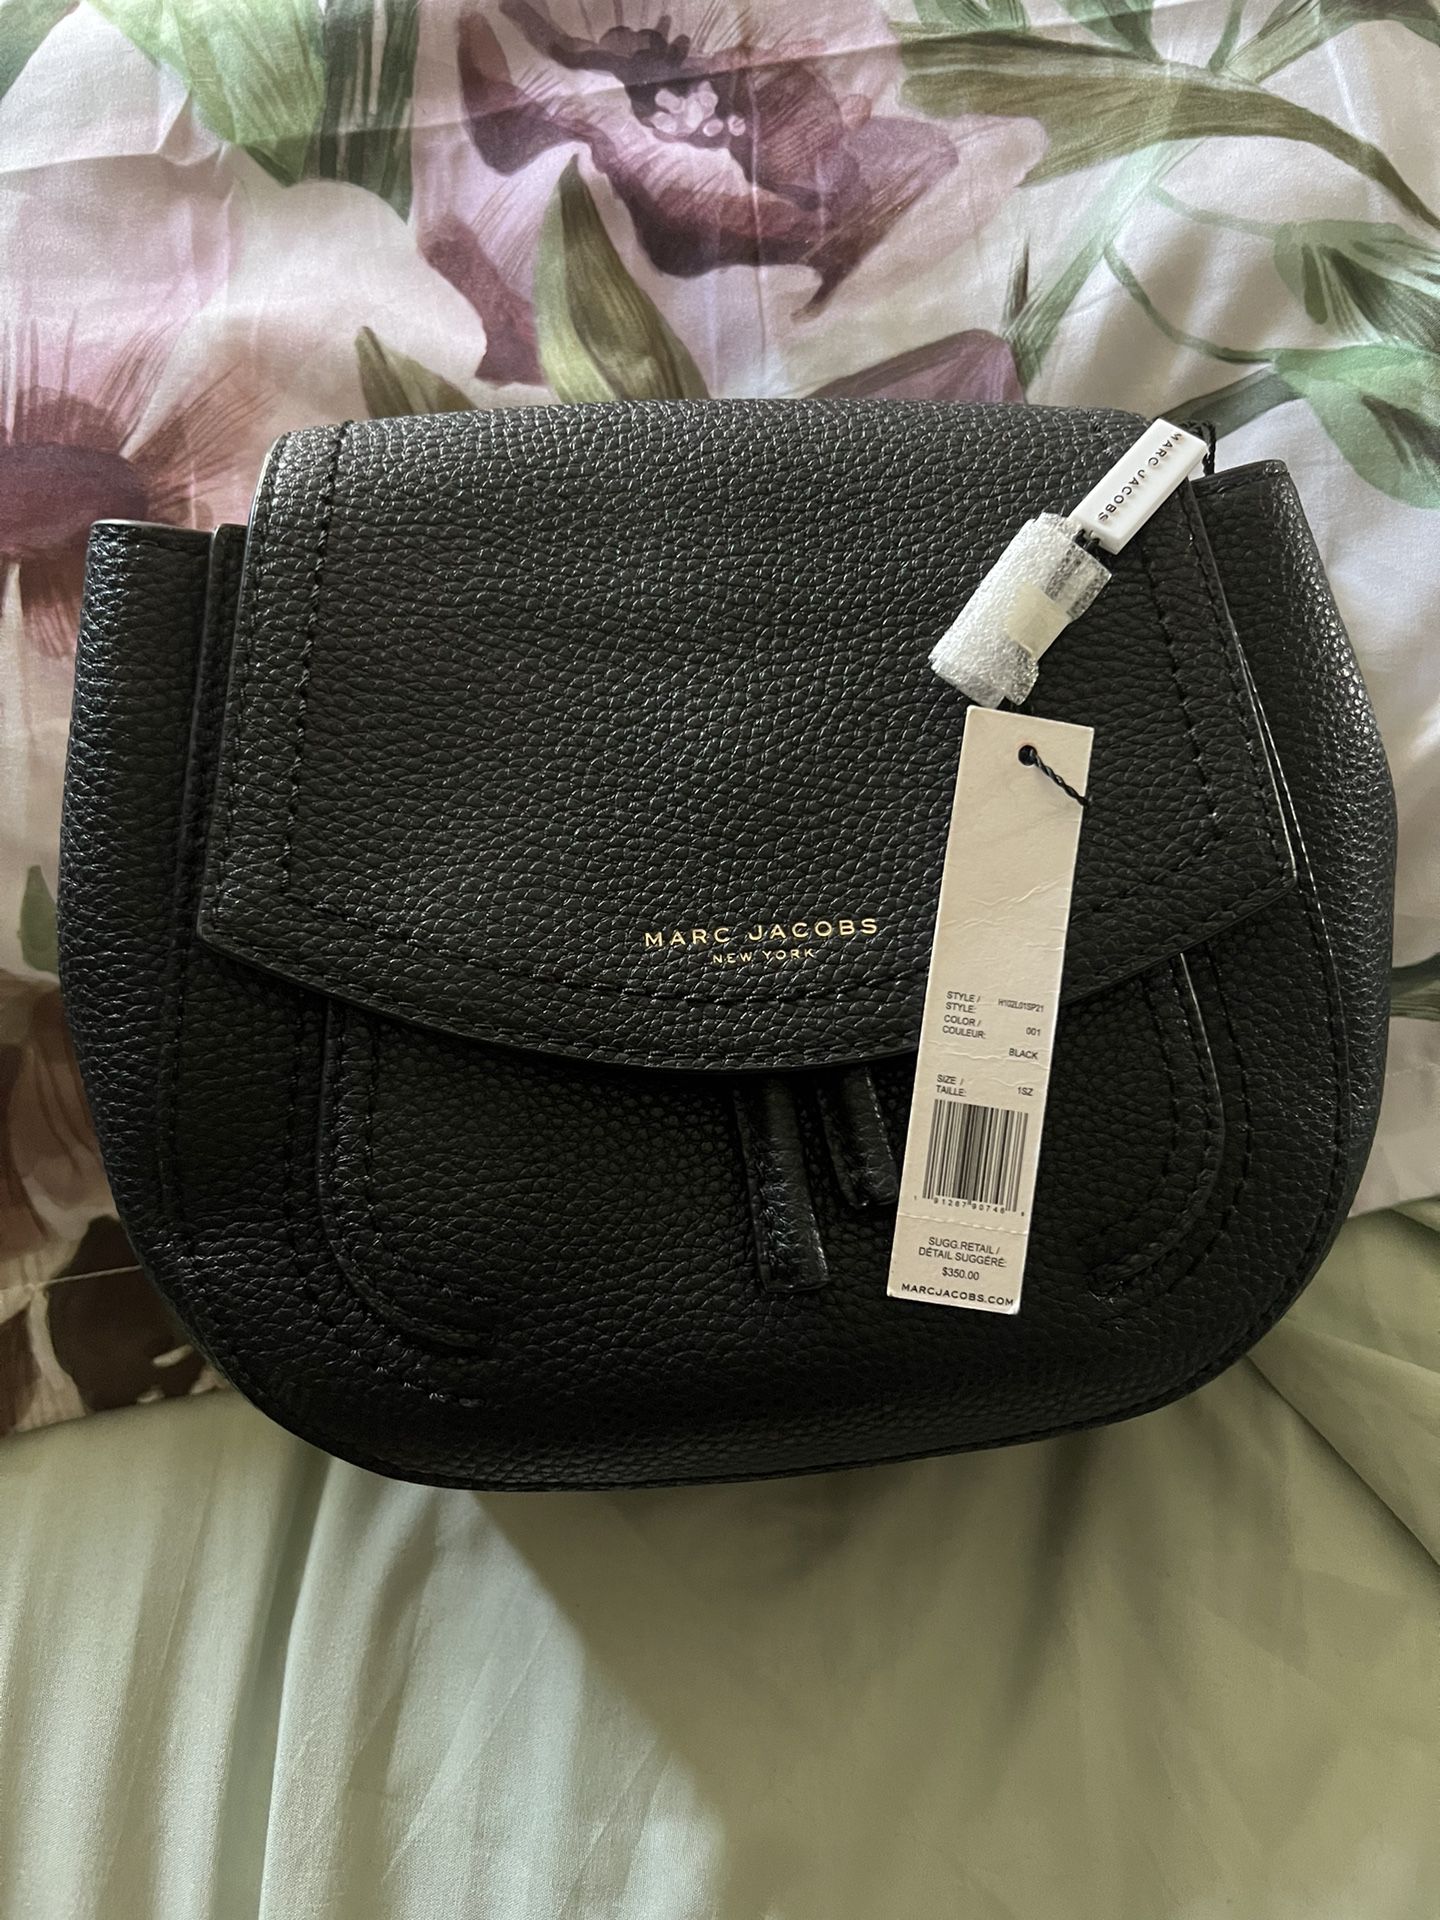 Marc Jacobs Crossbody Bag for Sale in Chula Vista, CA - OfferUp